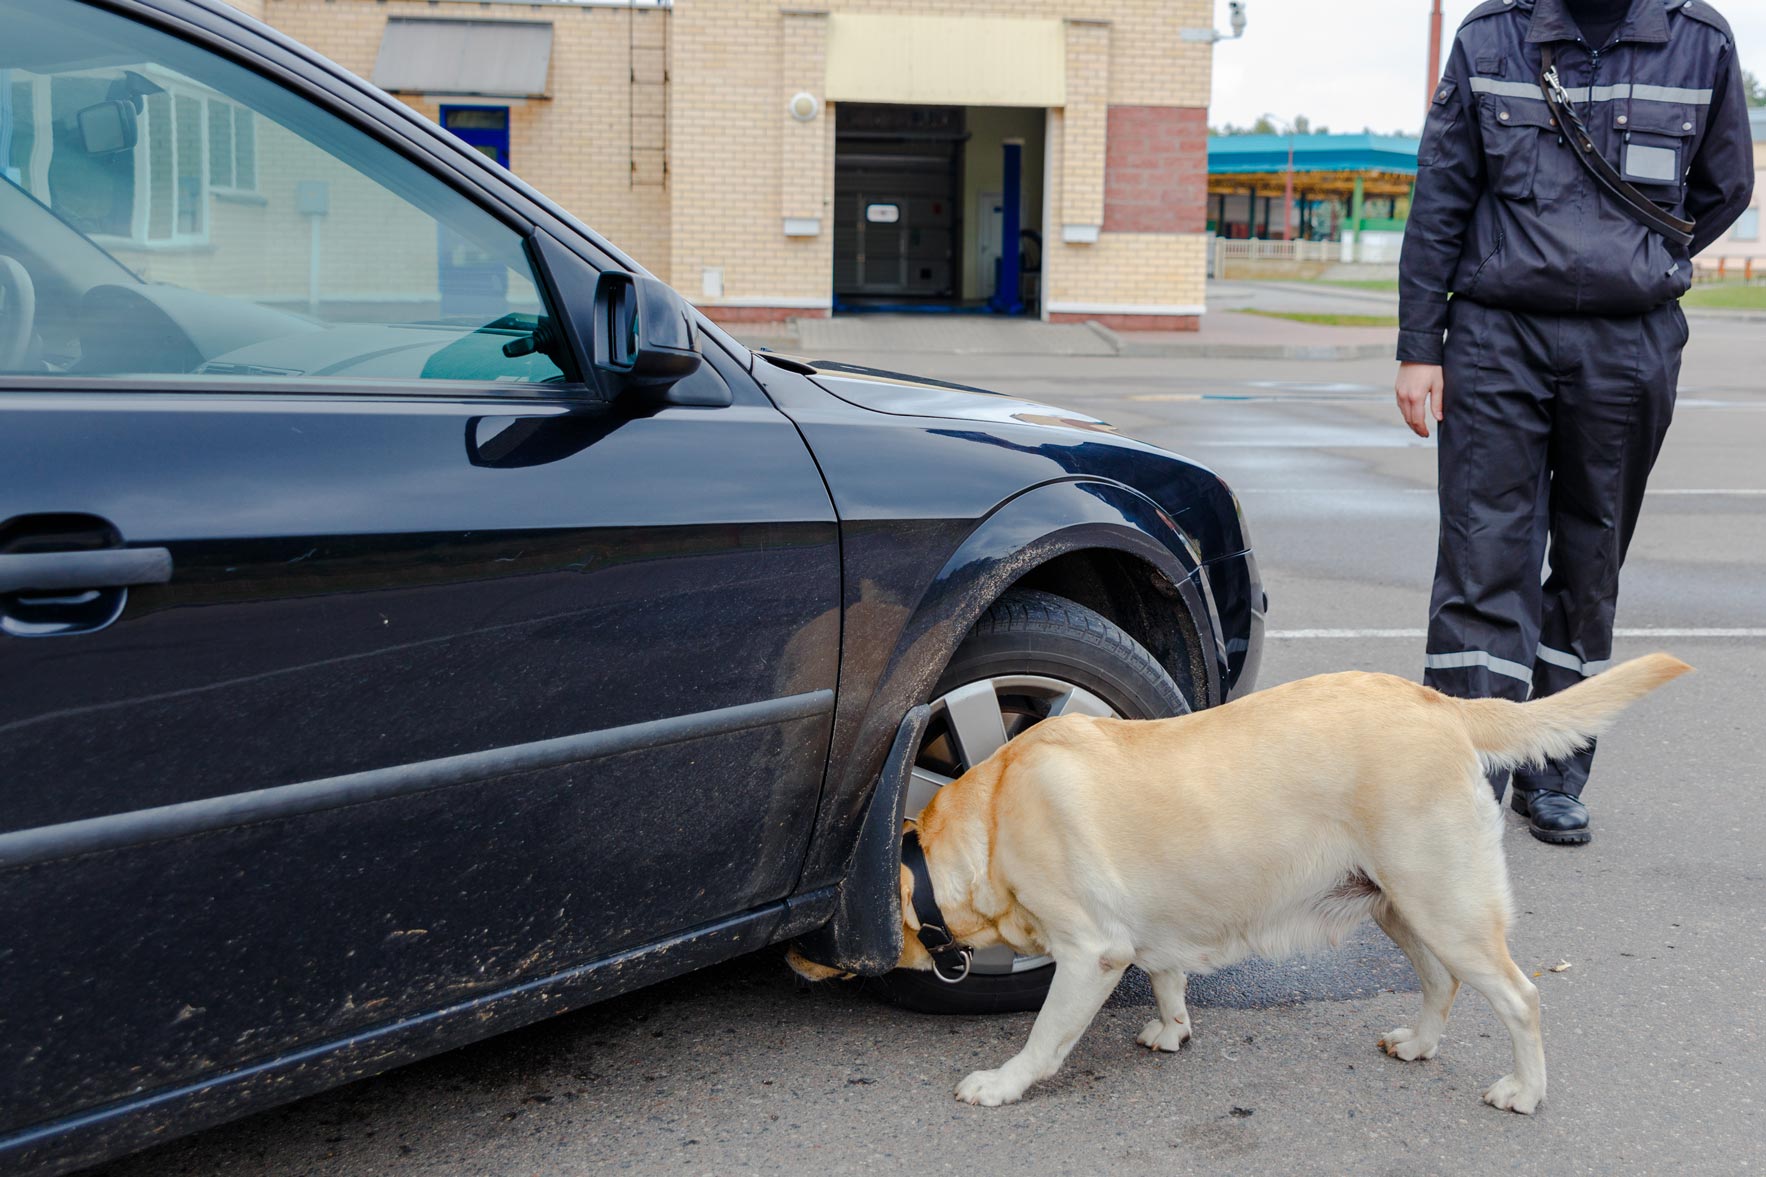 patrol dog and officer inspecting abandoned vehicle